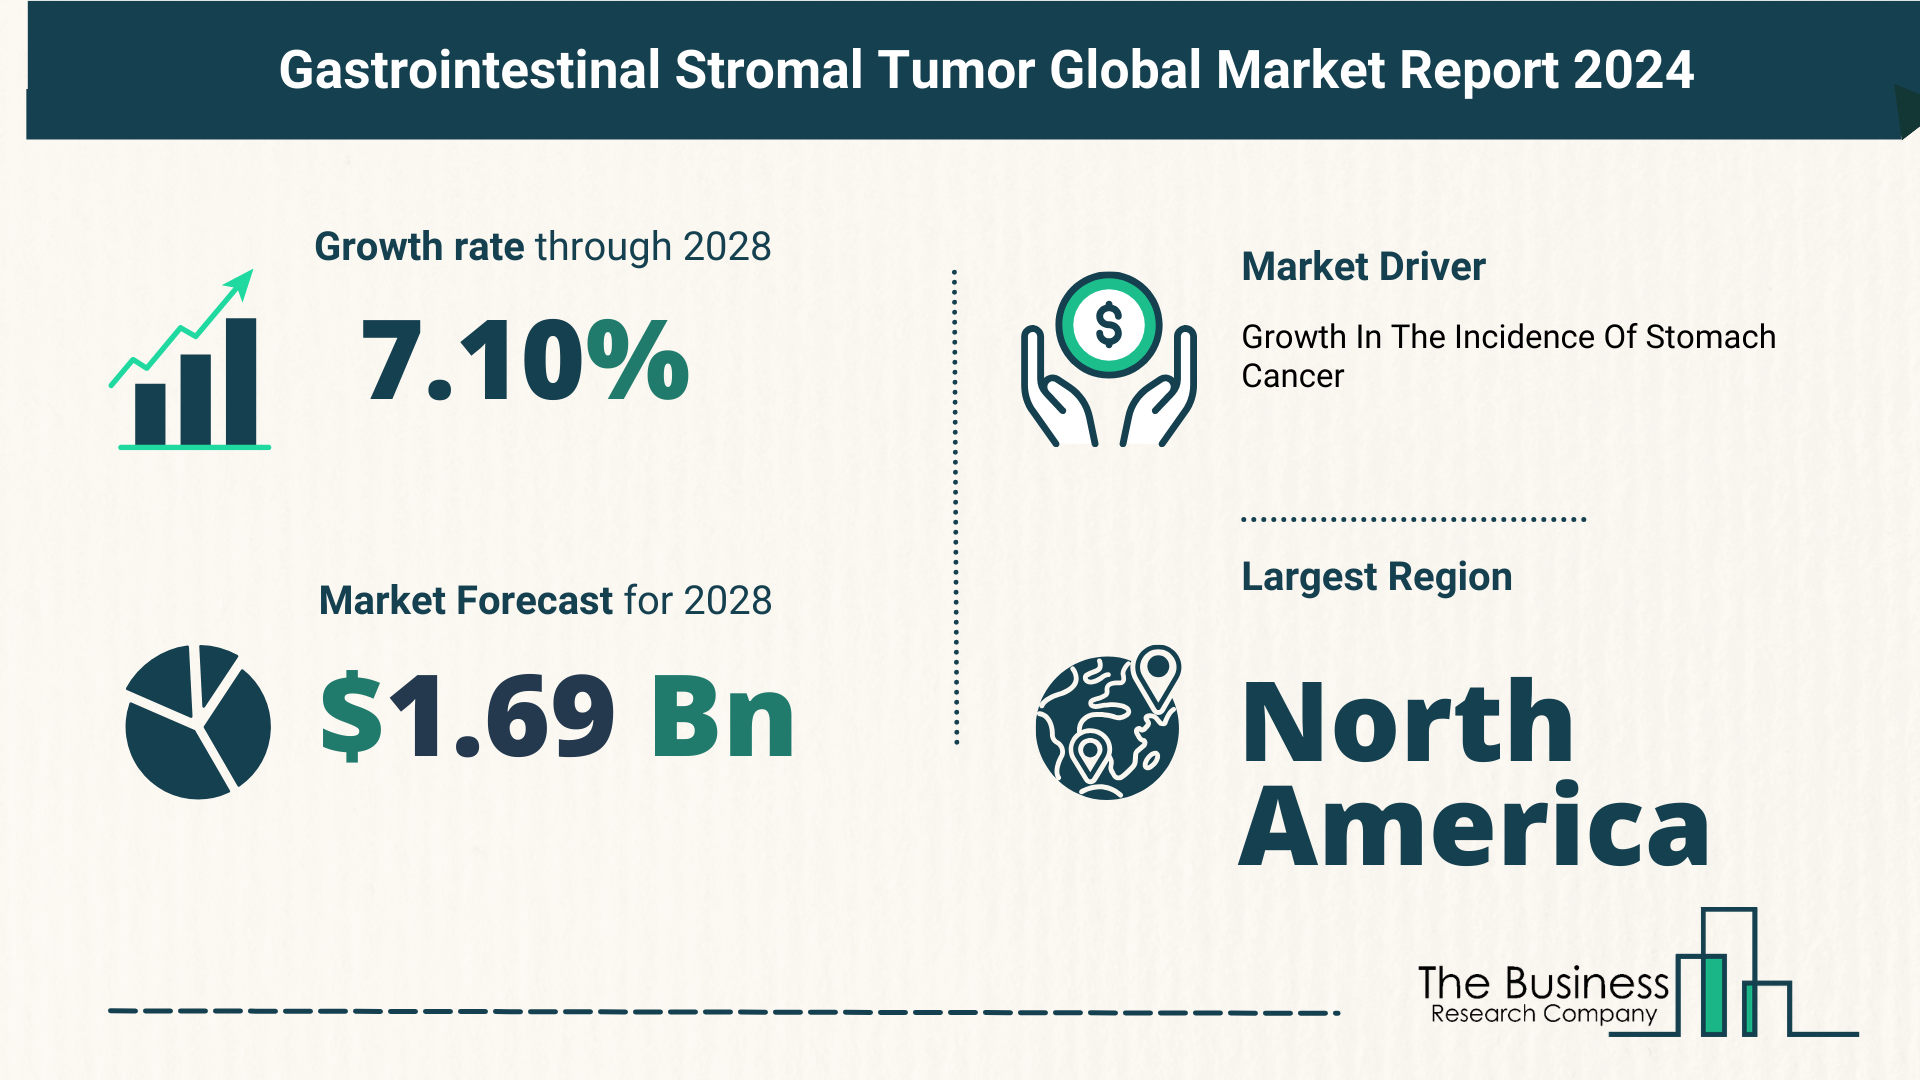 Key Trends And Drivers In The Gastrointestinal Stromal Tumor Market 2024